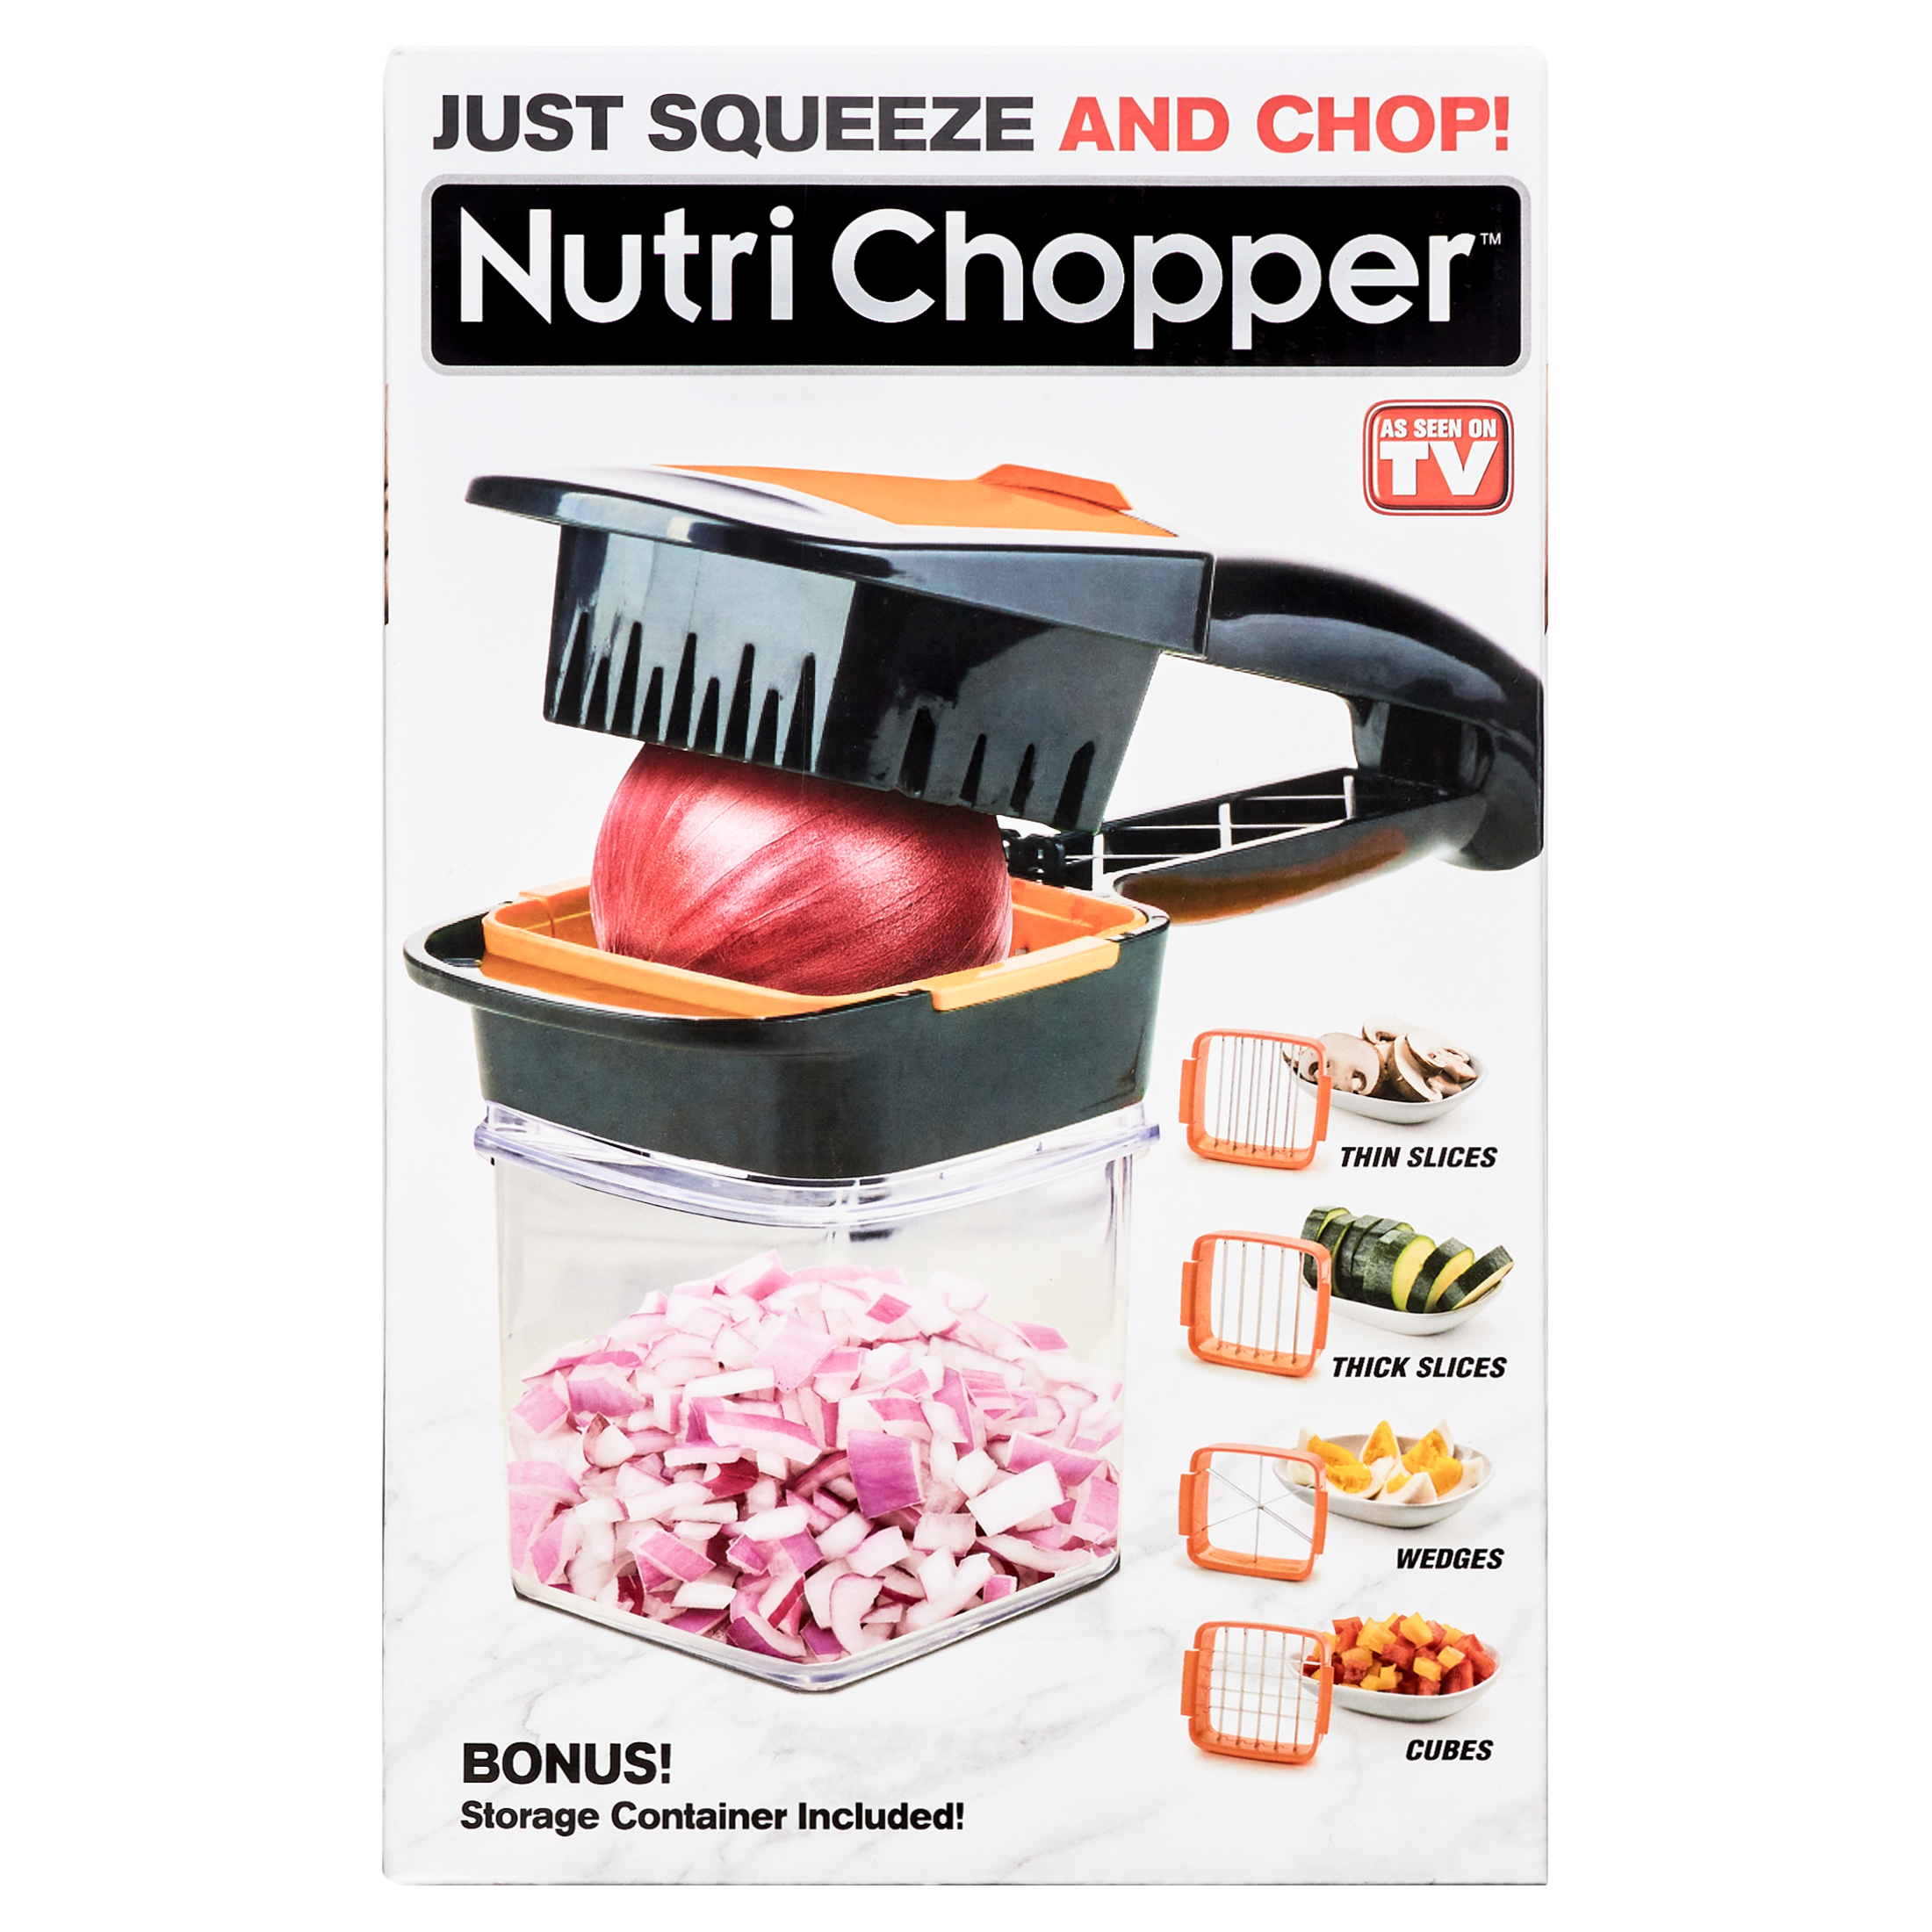 Nutri Chopper Vegetable Slicer that Chops, Cubes and Wedges, Multi-purpose Food Chopper with Stainless Steel Blades, As Seen on TV - image 1 of 15